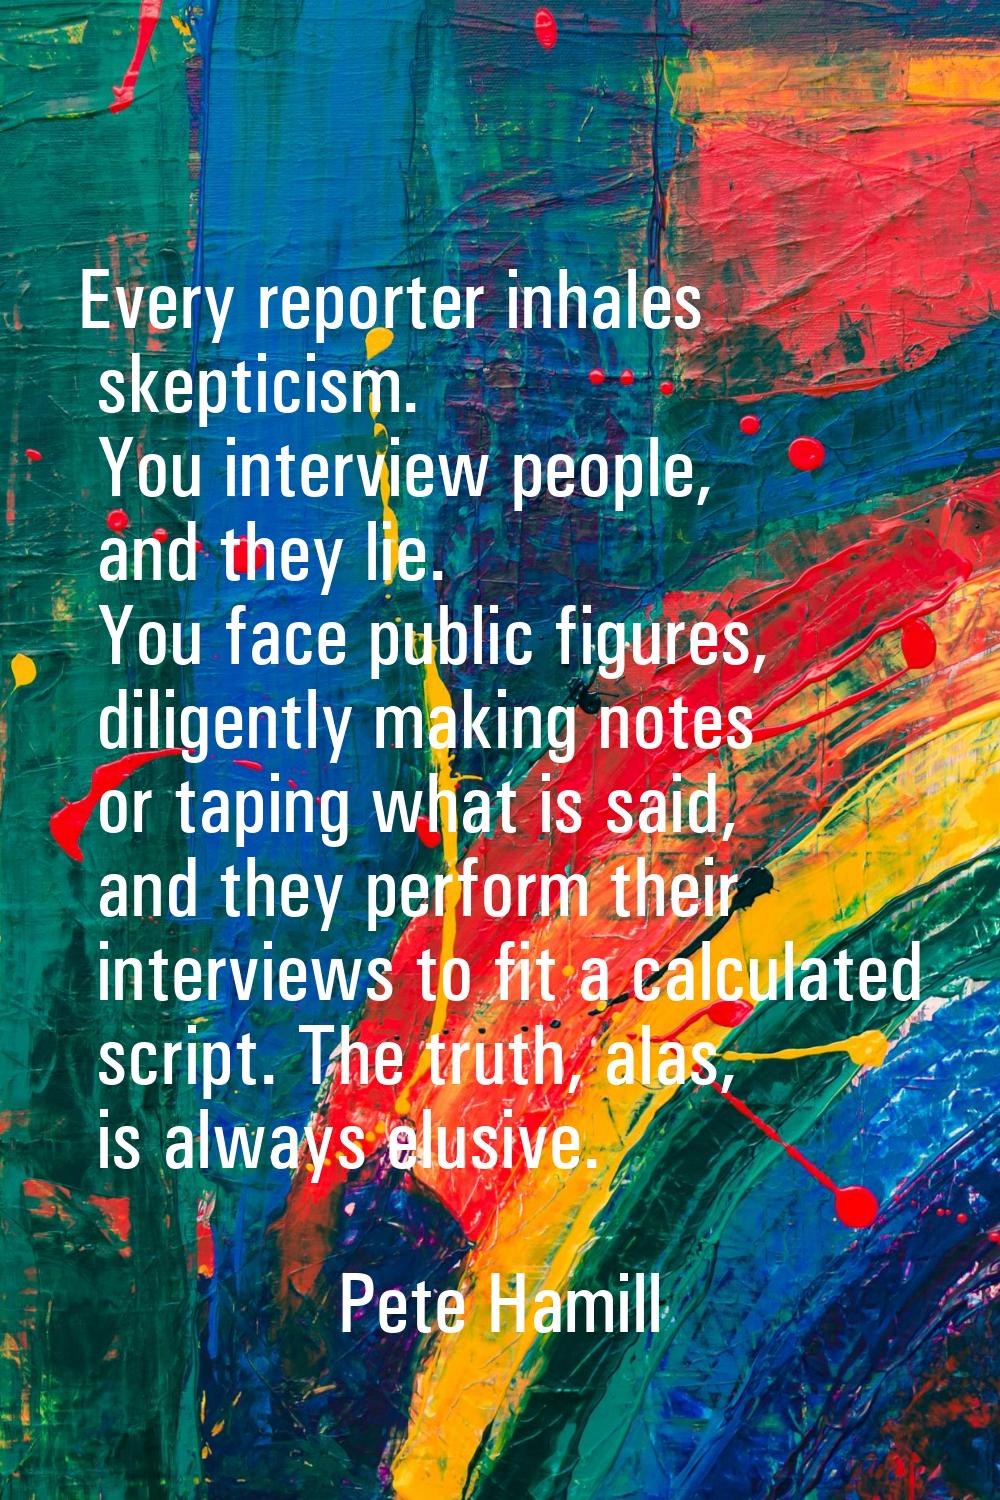 Every reporter inhales skepticism. You interview people, and they lie. You face public figures, dil